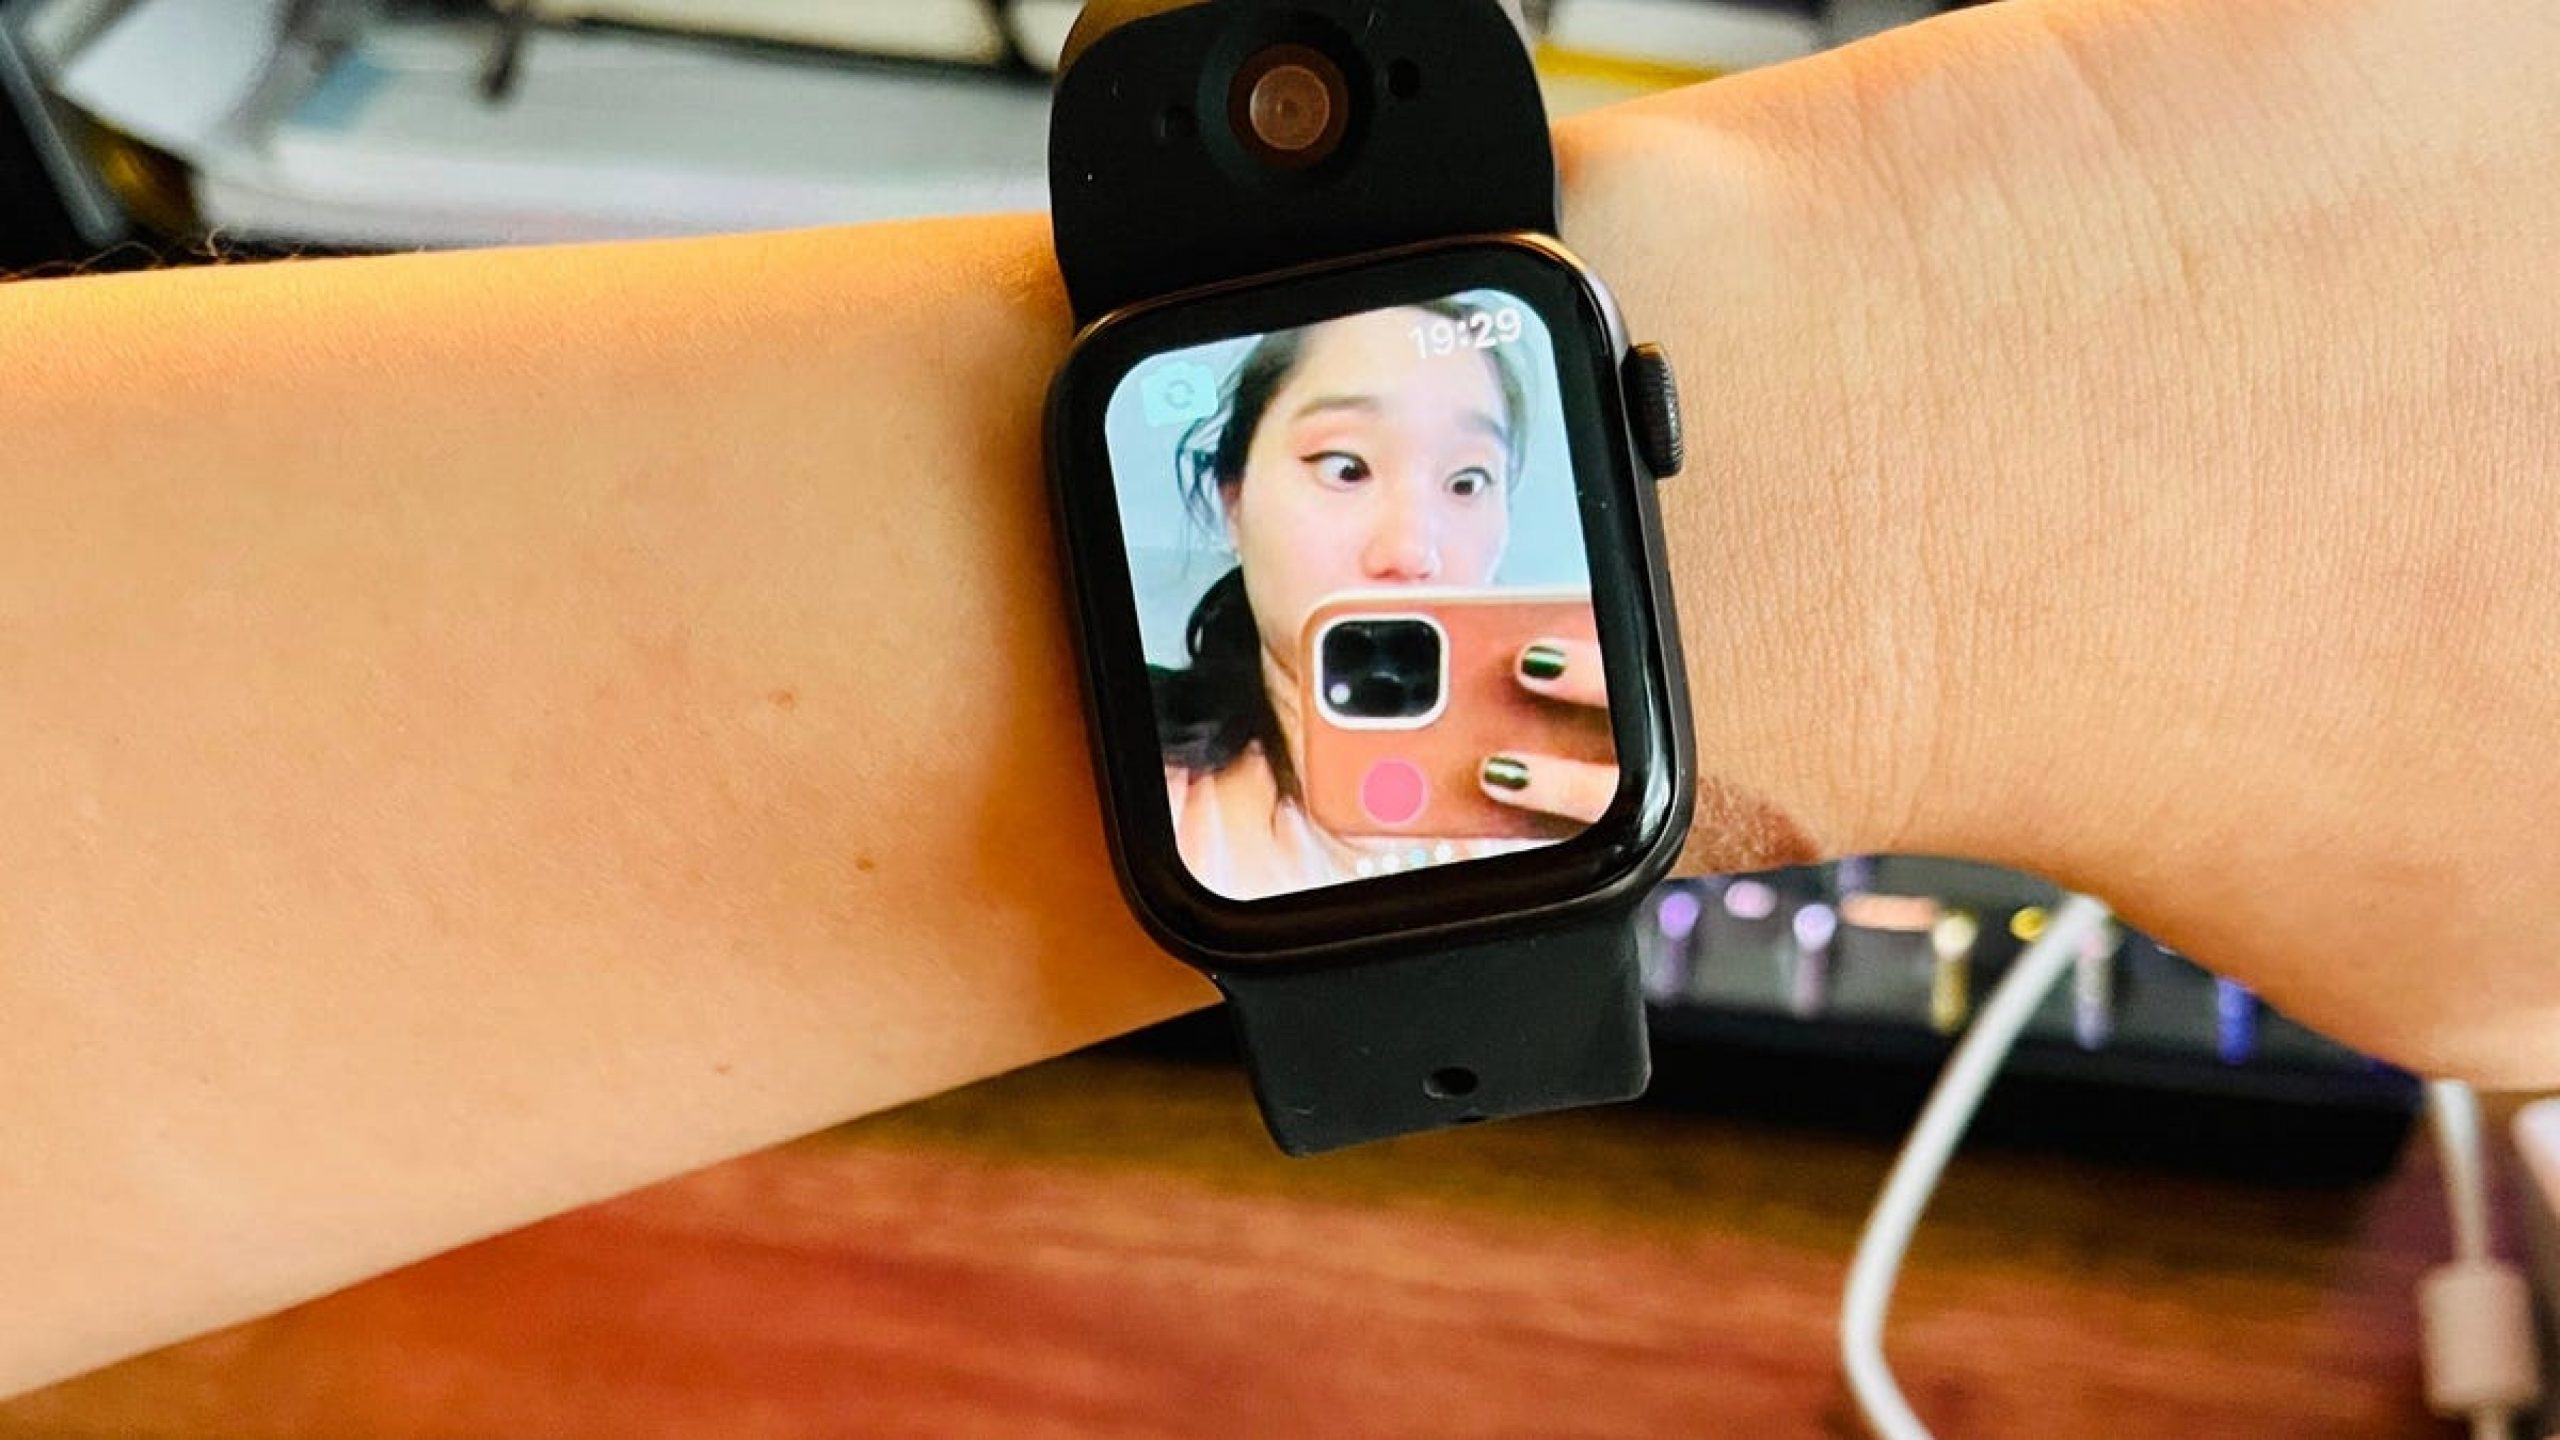 This Apple Watch Camera Band Brings Live Video to Your Wrist